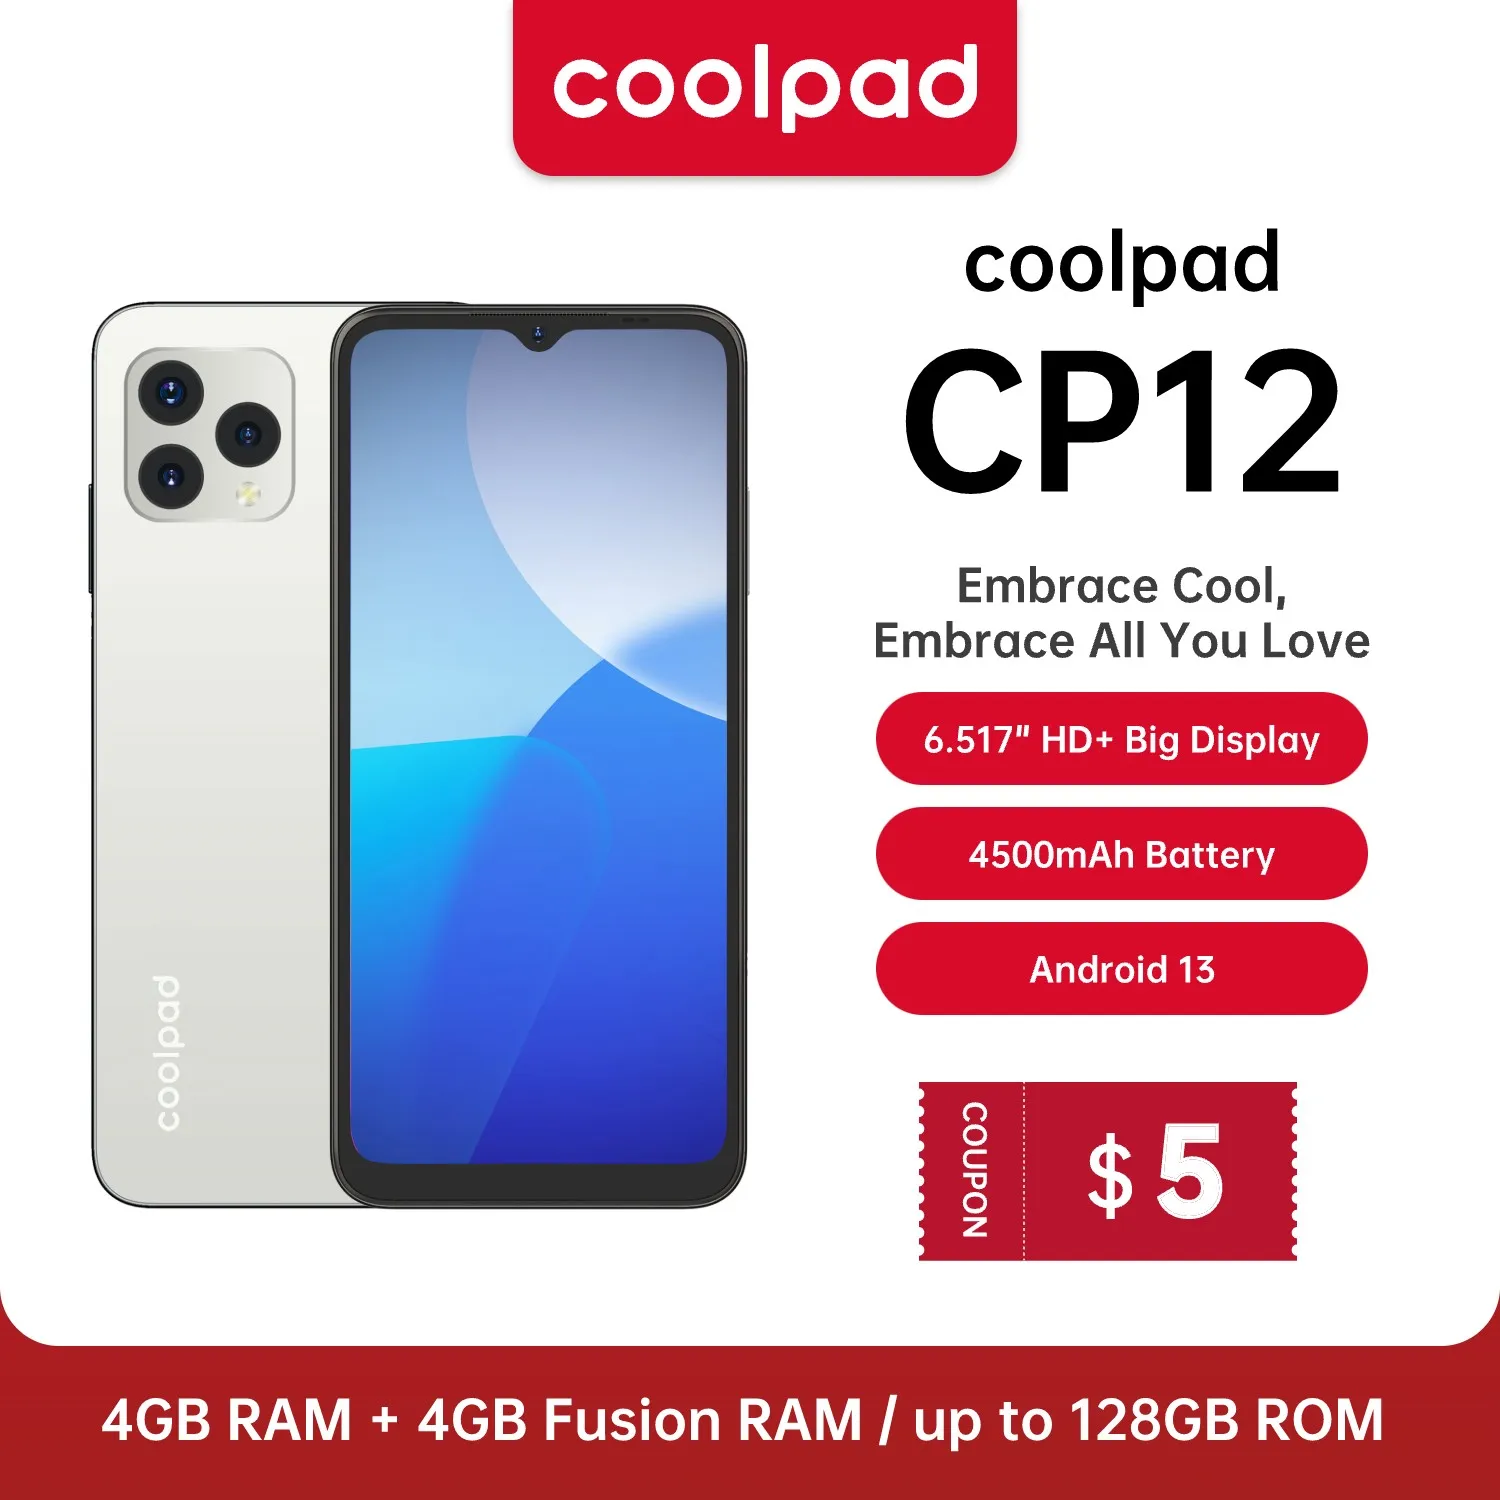 NEW Coolpad COOL CP12 Smartphone Android 13 6.517 HD+ 4GB 128GB 13 MP Triple Camera 4500mAh Battery Dual SIM 4G Cellphone